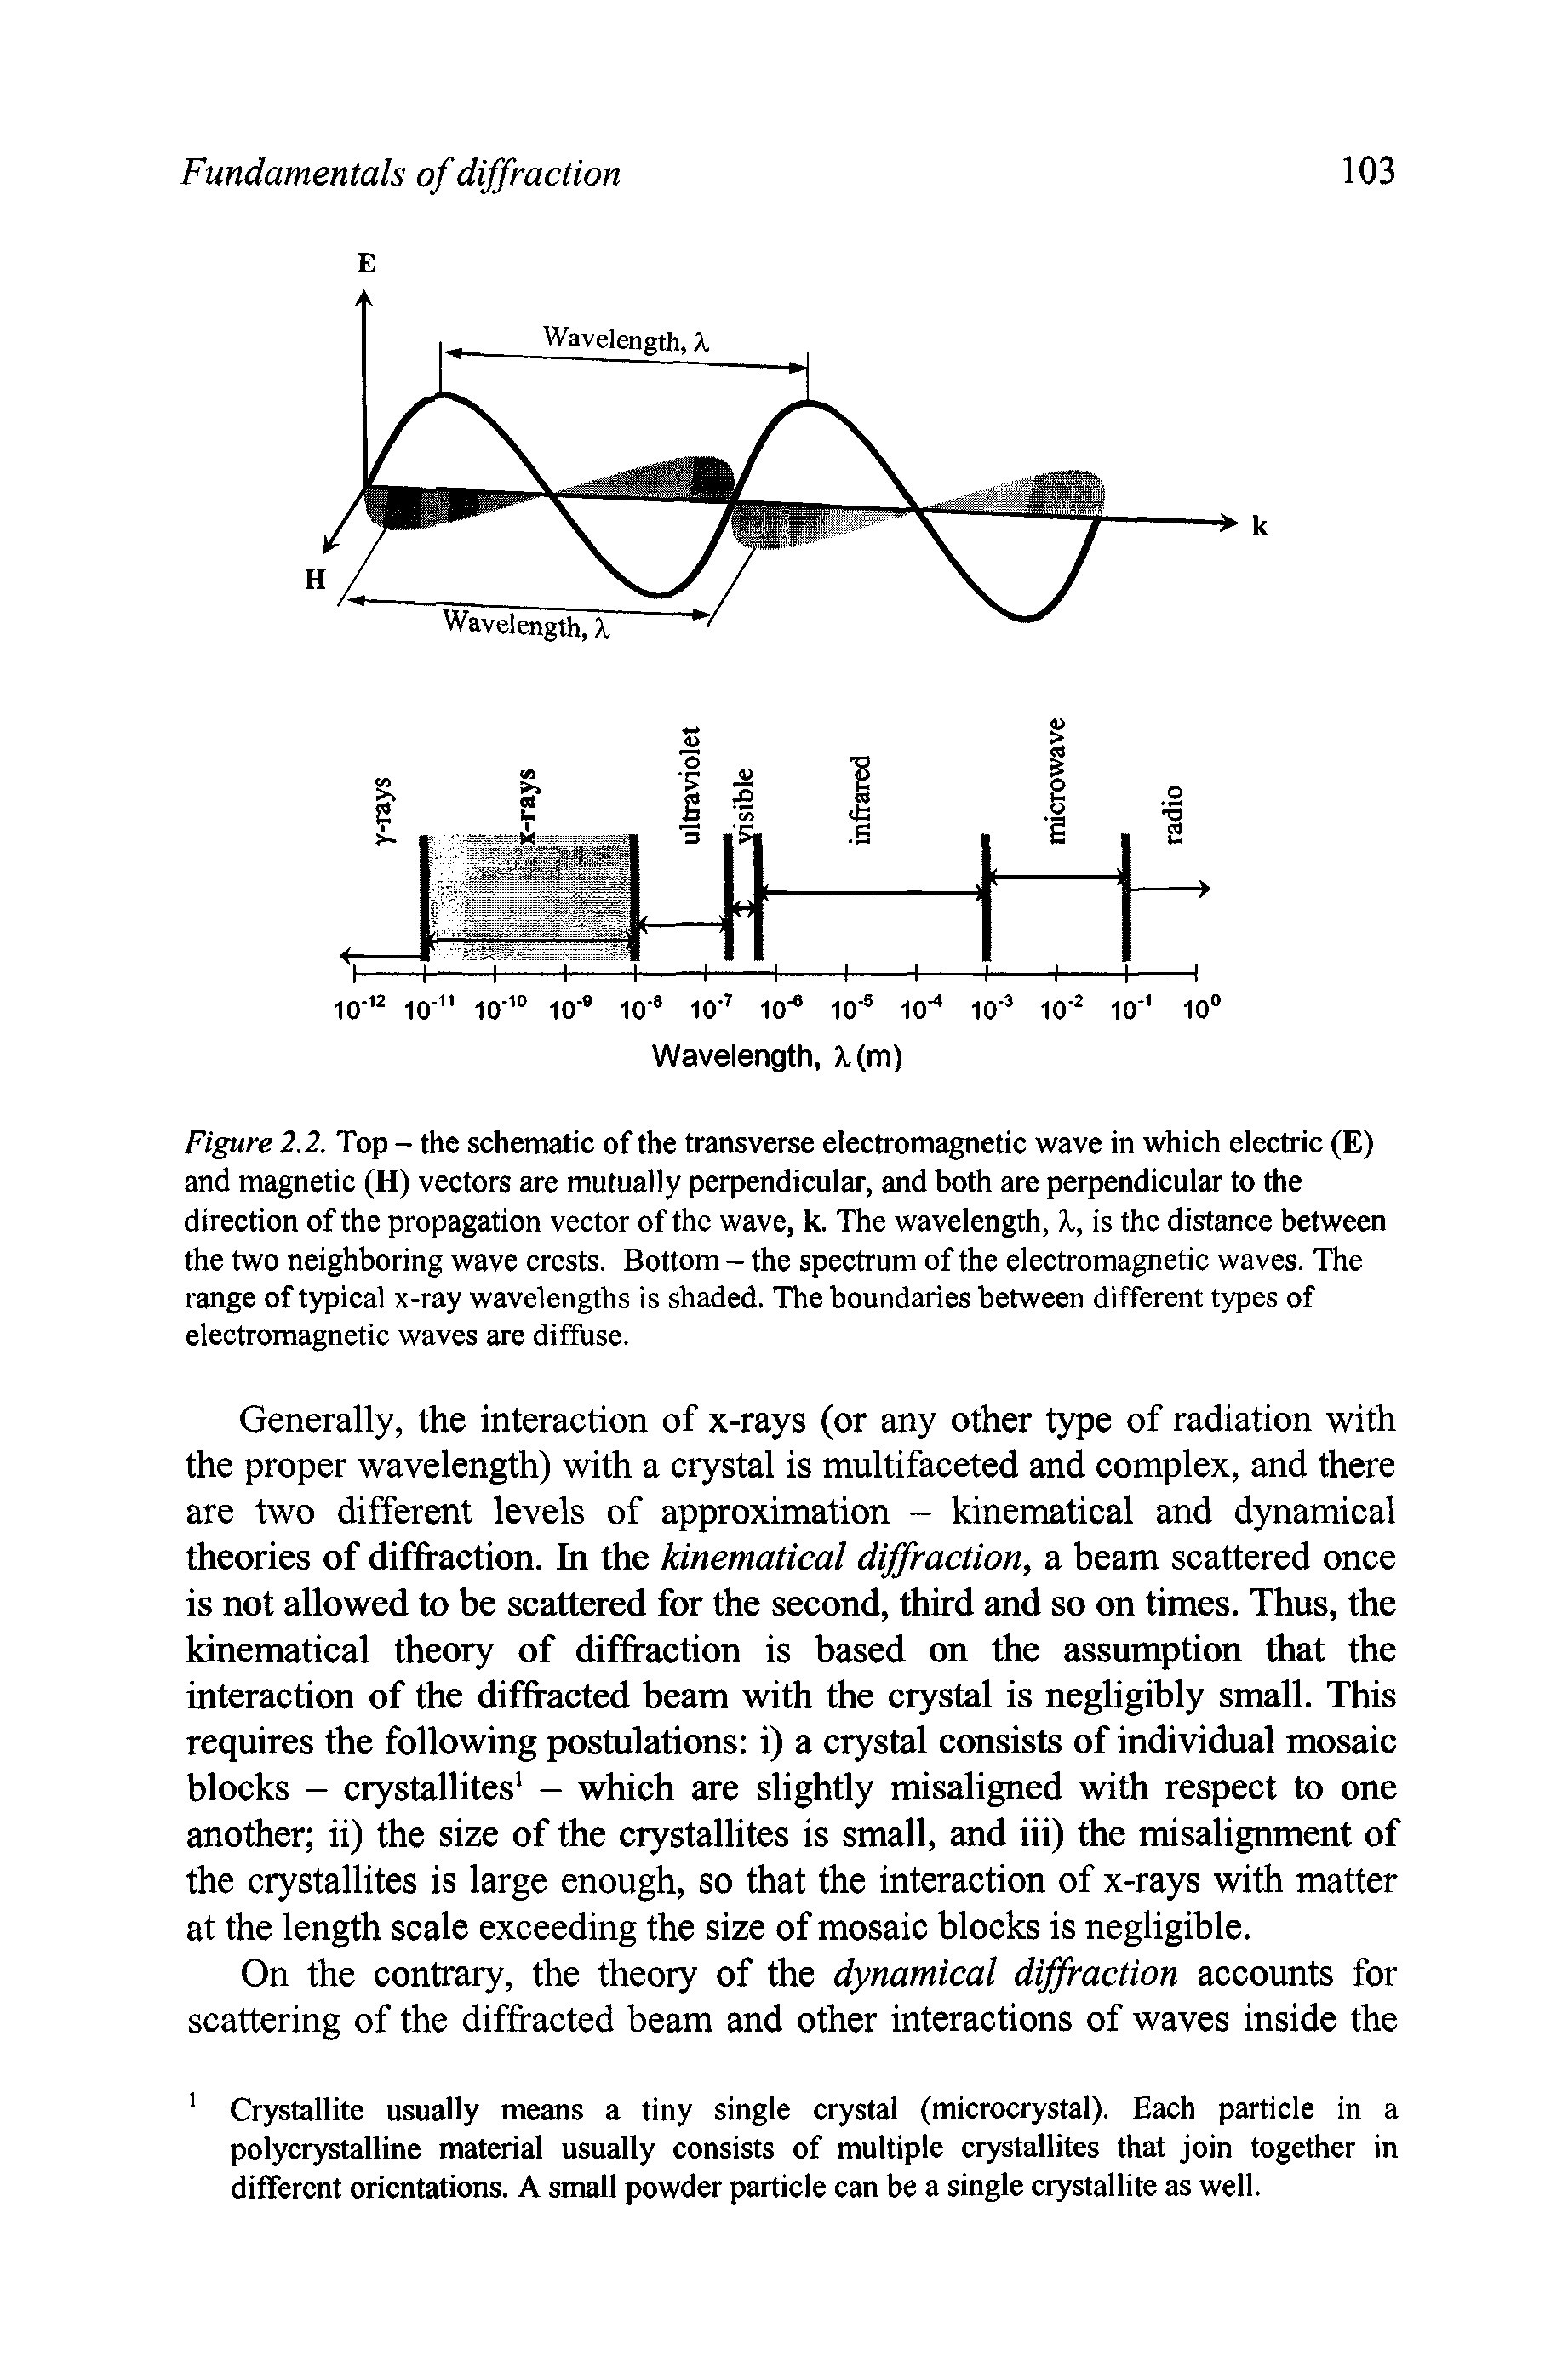 Figure 2.2. Top - the schematic of the transverse electromagnetic wave in which electric (E) and magnetic (H) vectors are mutually perpendicular, and both are perpendicular to the direction of the propagation vector of the wave, k. The wavelength, is the distance between the two neighboring wave crests. Bottom - the spectrum of the electromagnetic waves. The range of typical x-ray wavelengths is shaded. The boundaries between different types of electromagnetic waves are diffuse.